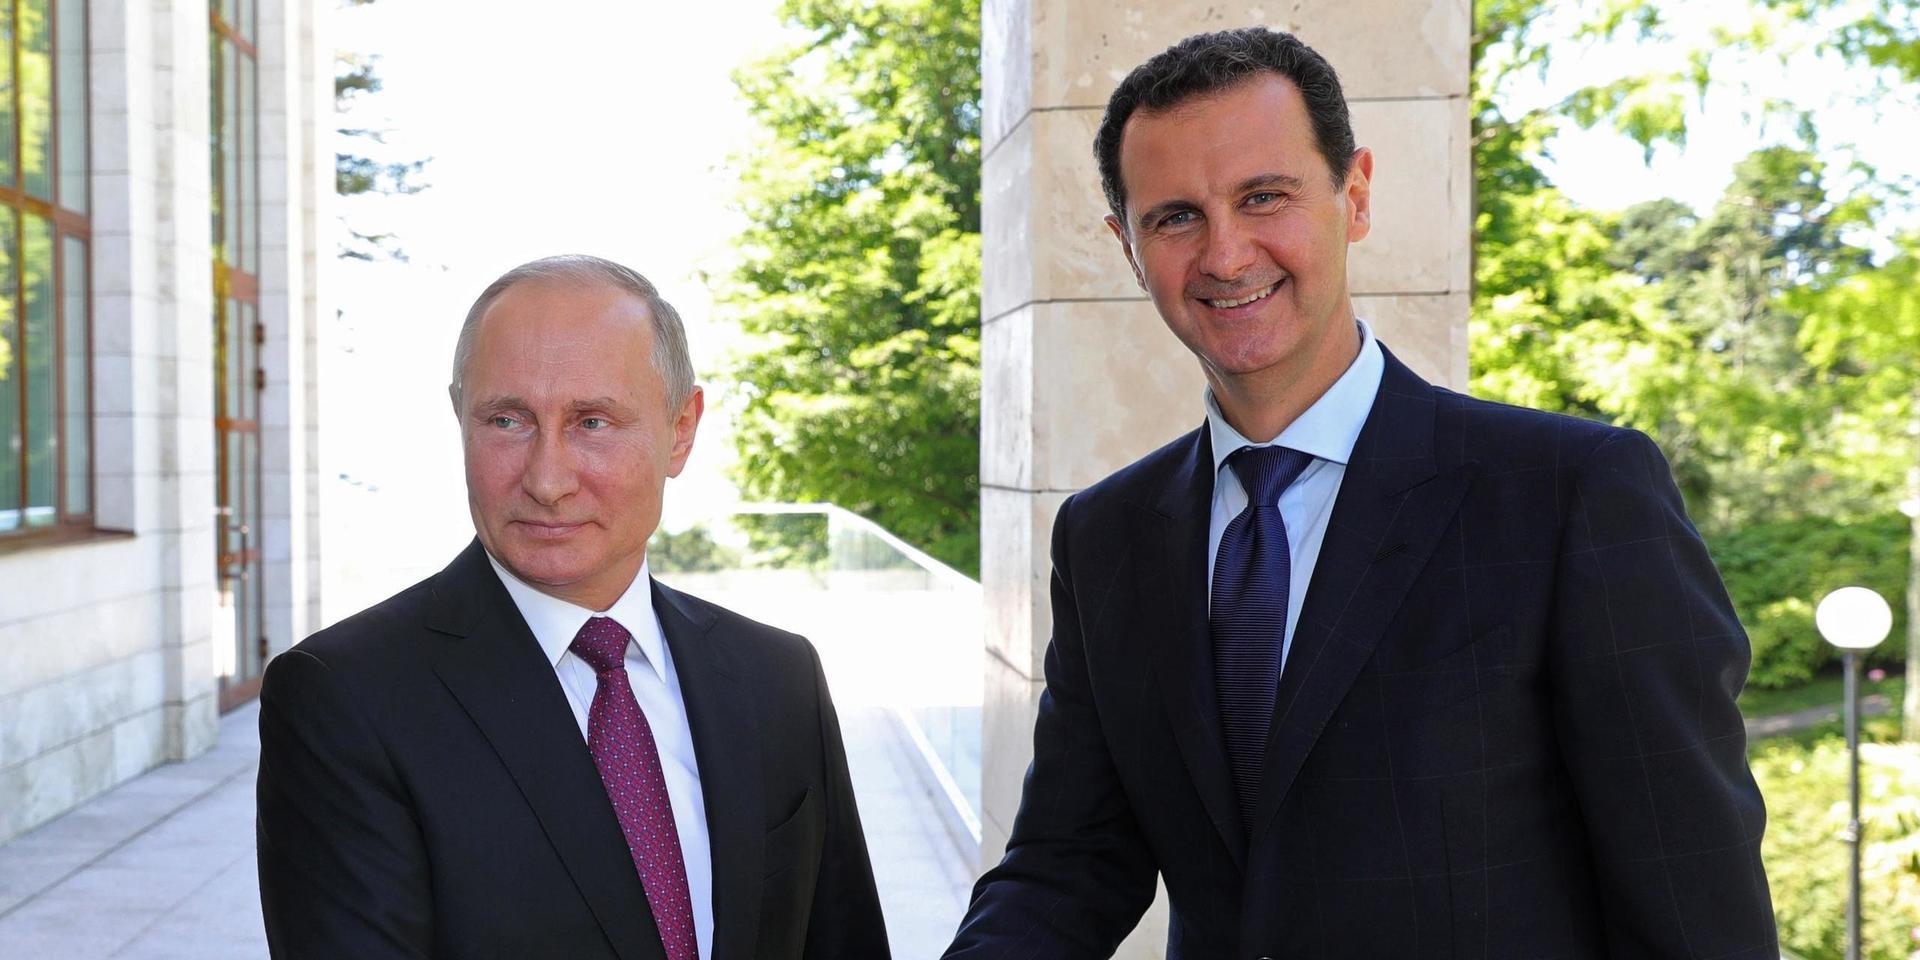 FILE - In this May 17, 2018, file photo, Russian President Vladimir Putin, left, shakes hands with Syrian President Bashar al-Assad during their meeting in the Black Sea resort of Sochi, Russia. Assad is the last man standing among a crop of Arab dictators after the fall of the Sudanese and Algerian leaders. He's survived an 8-year war to topple him and an Islamic caliphate over part of his broken country. But Bashar Assad's path is strewn with difficulties and the war for Syria is far from over. (Mikhail Klimentyev, Sputnik, Kremlin Pool Photo via AP, File)